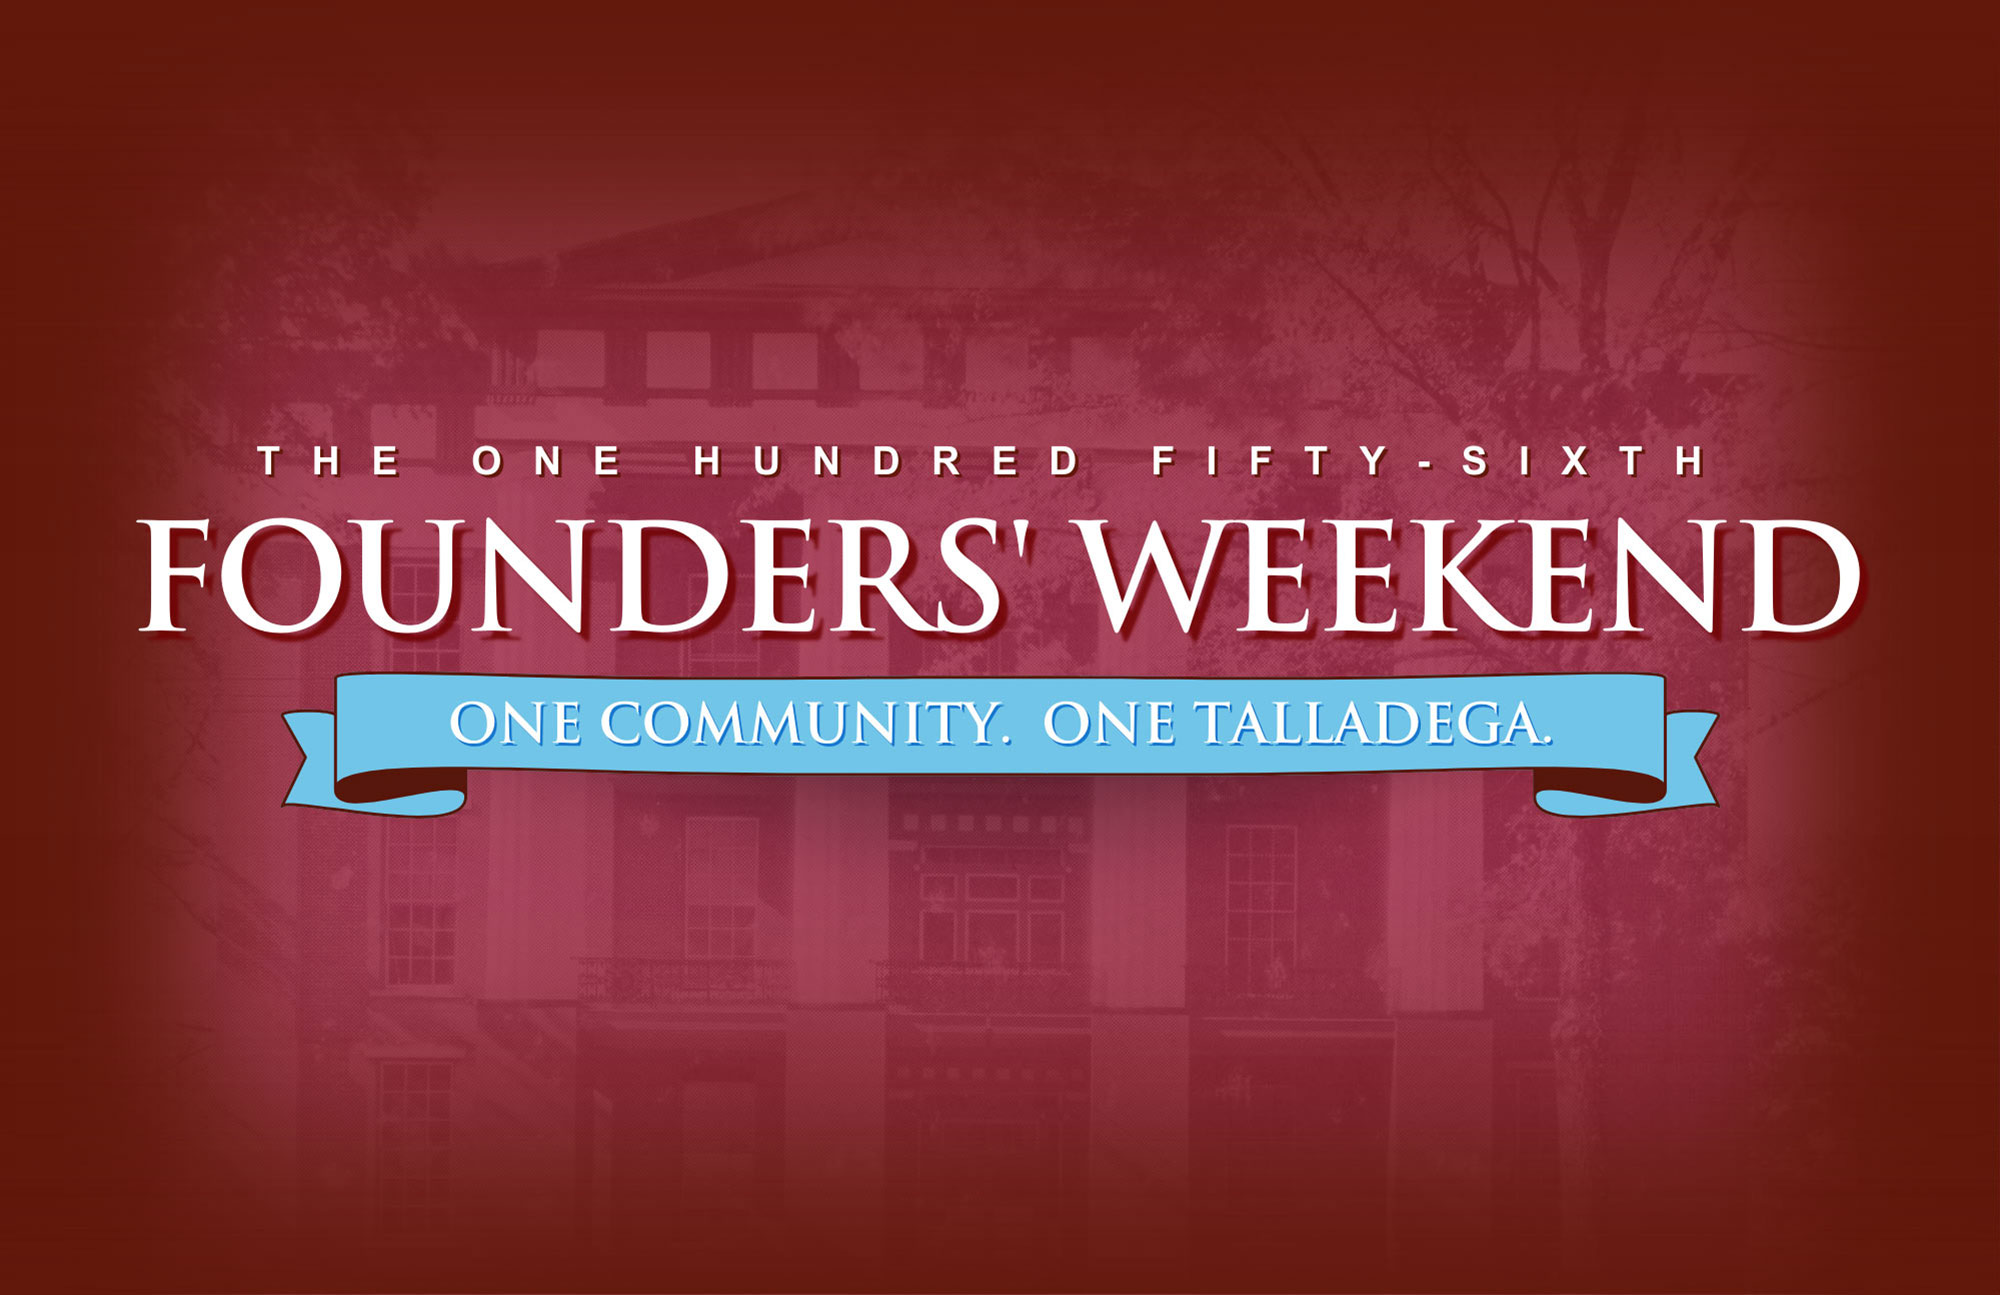 The One Hundred Fifty-Sixth Founders' Weekend